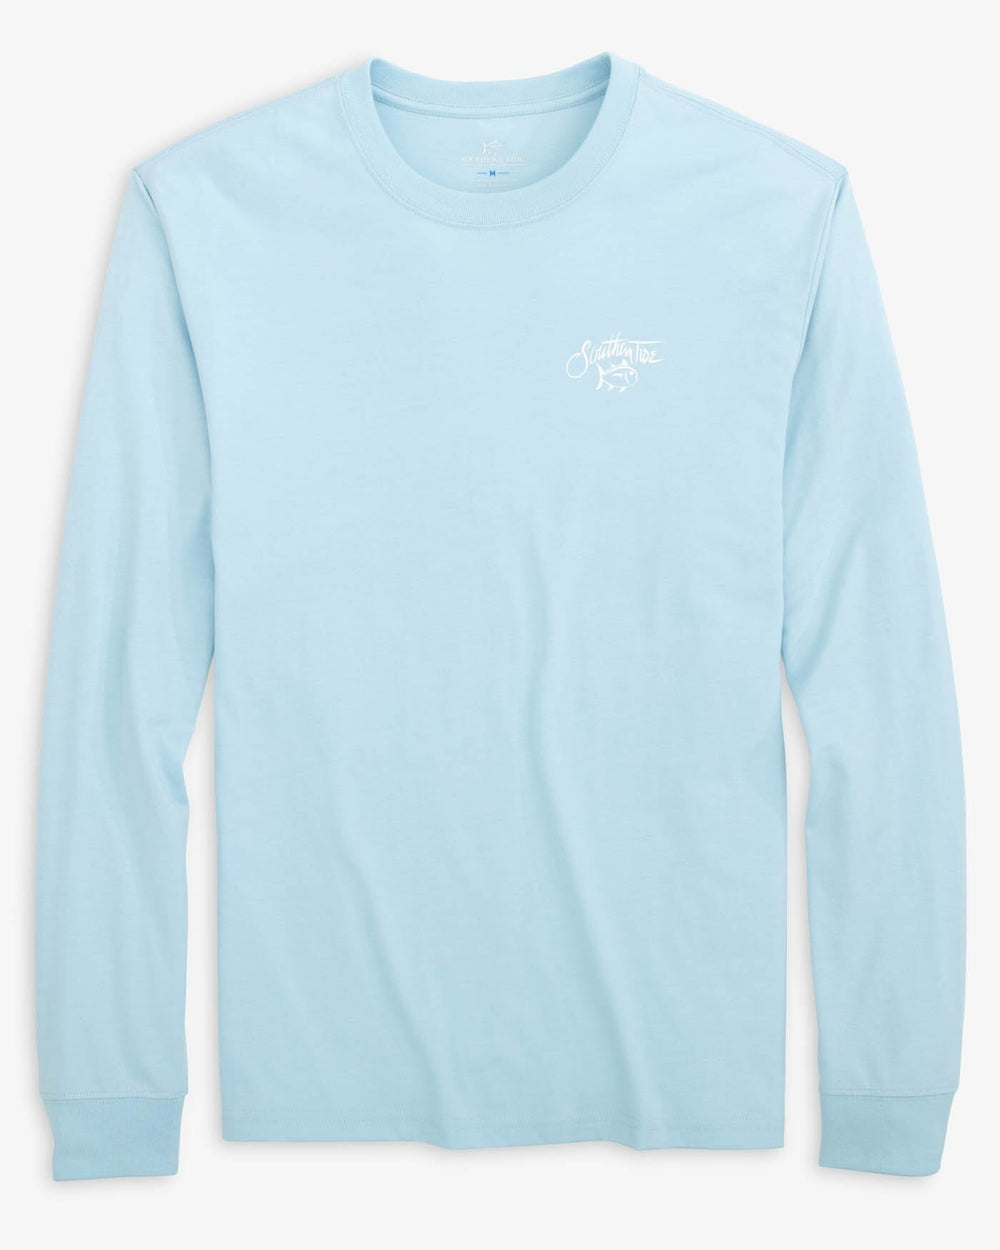 The front view of the Southern Tide Breakwater Trout Long Sleeve T-Shirt by Southern Tide - Dream Blue